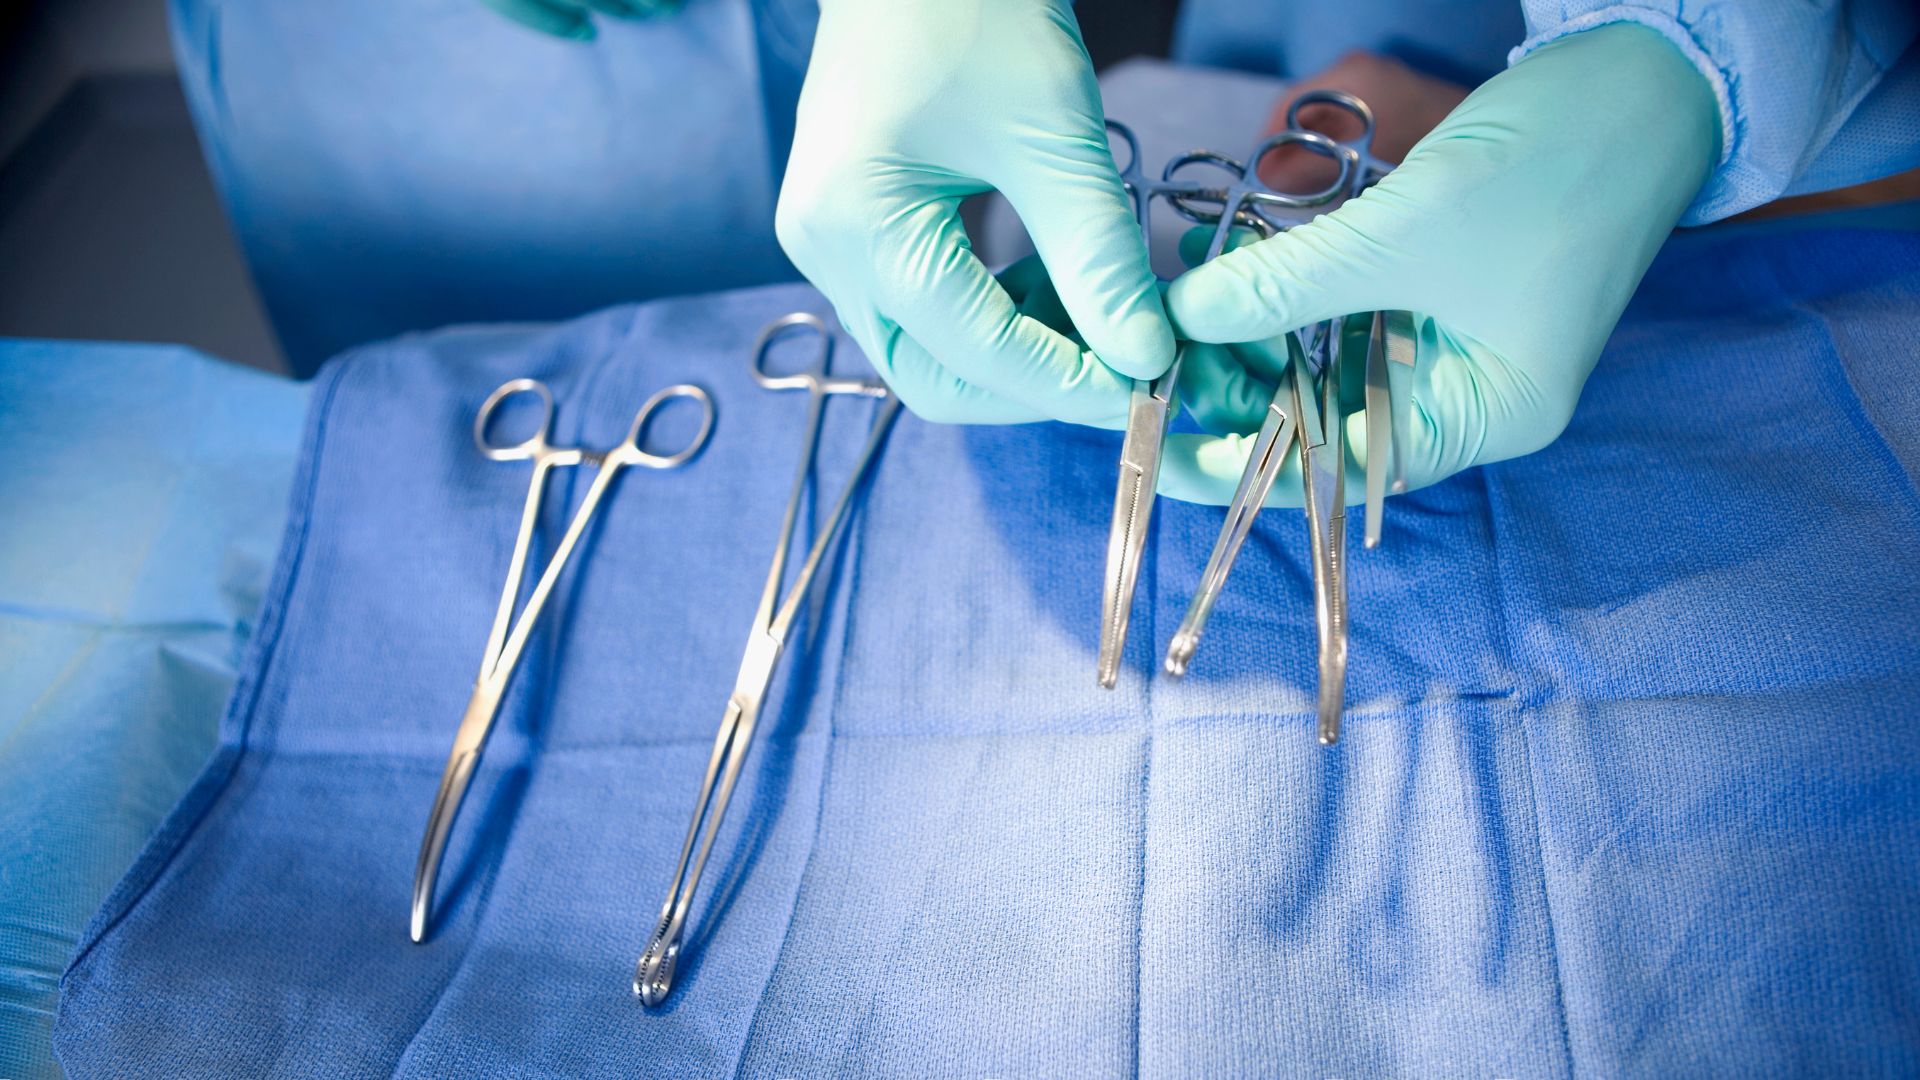 Two gloved hands holding surgical tools over a table covered in a blue sheet.